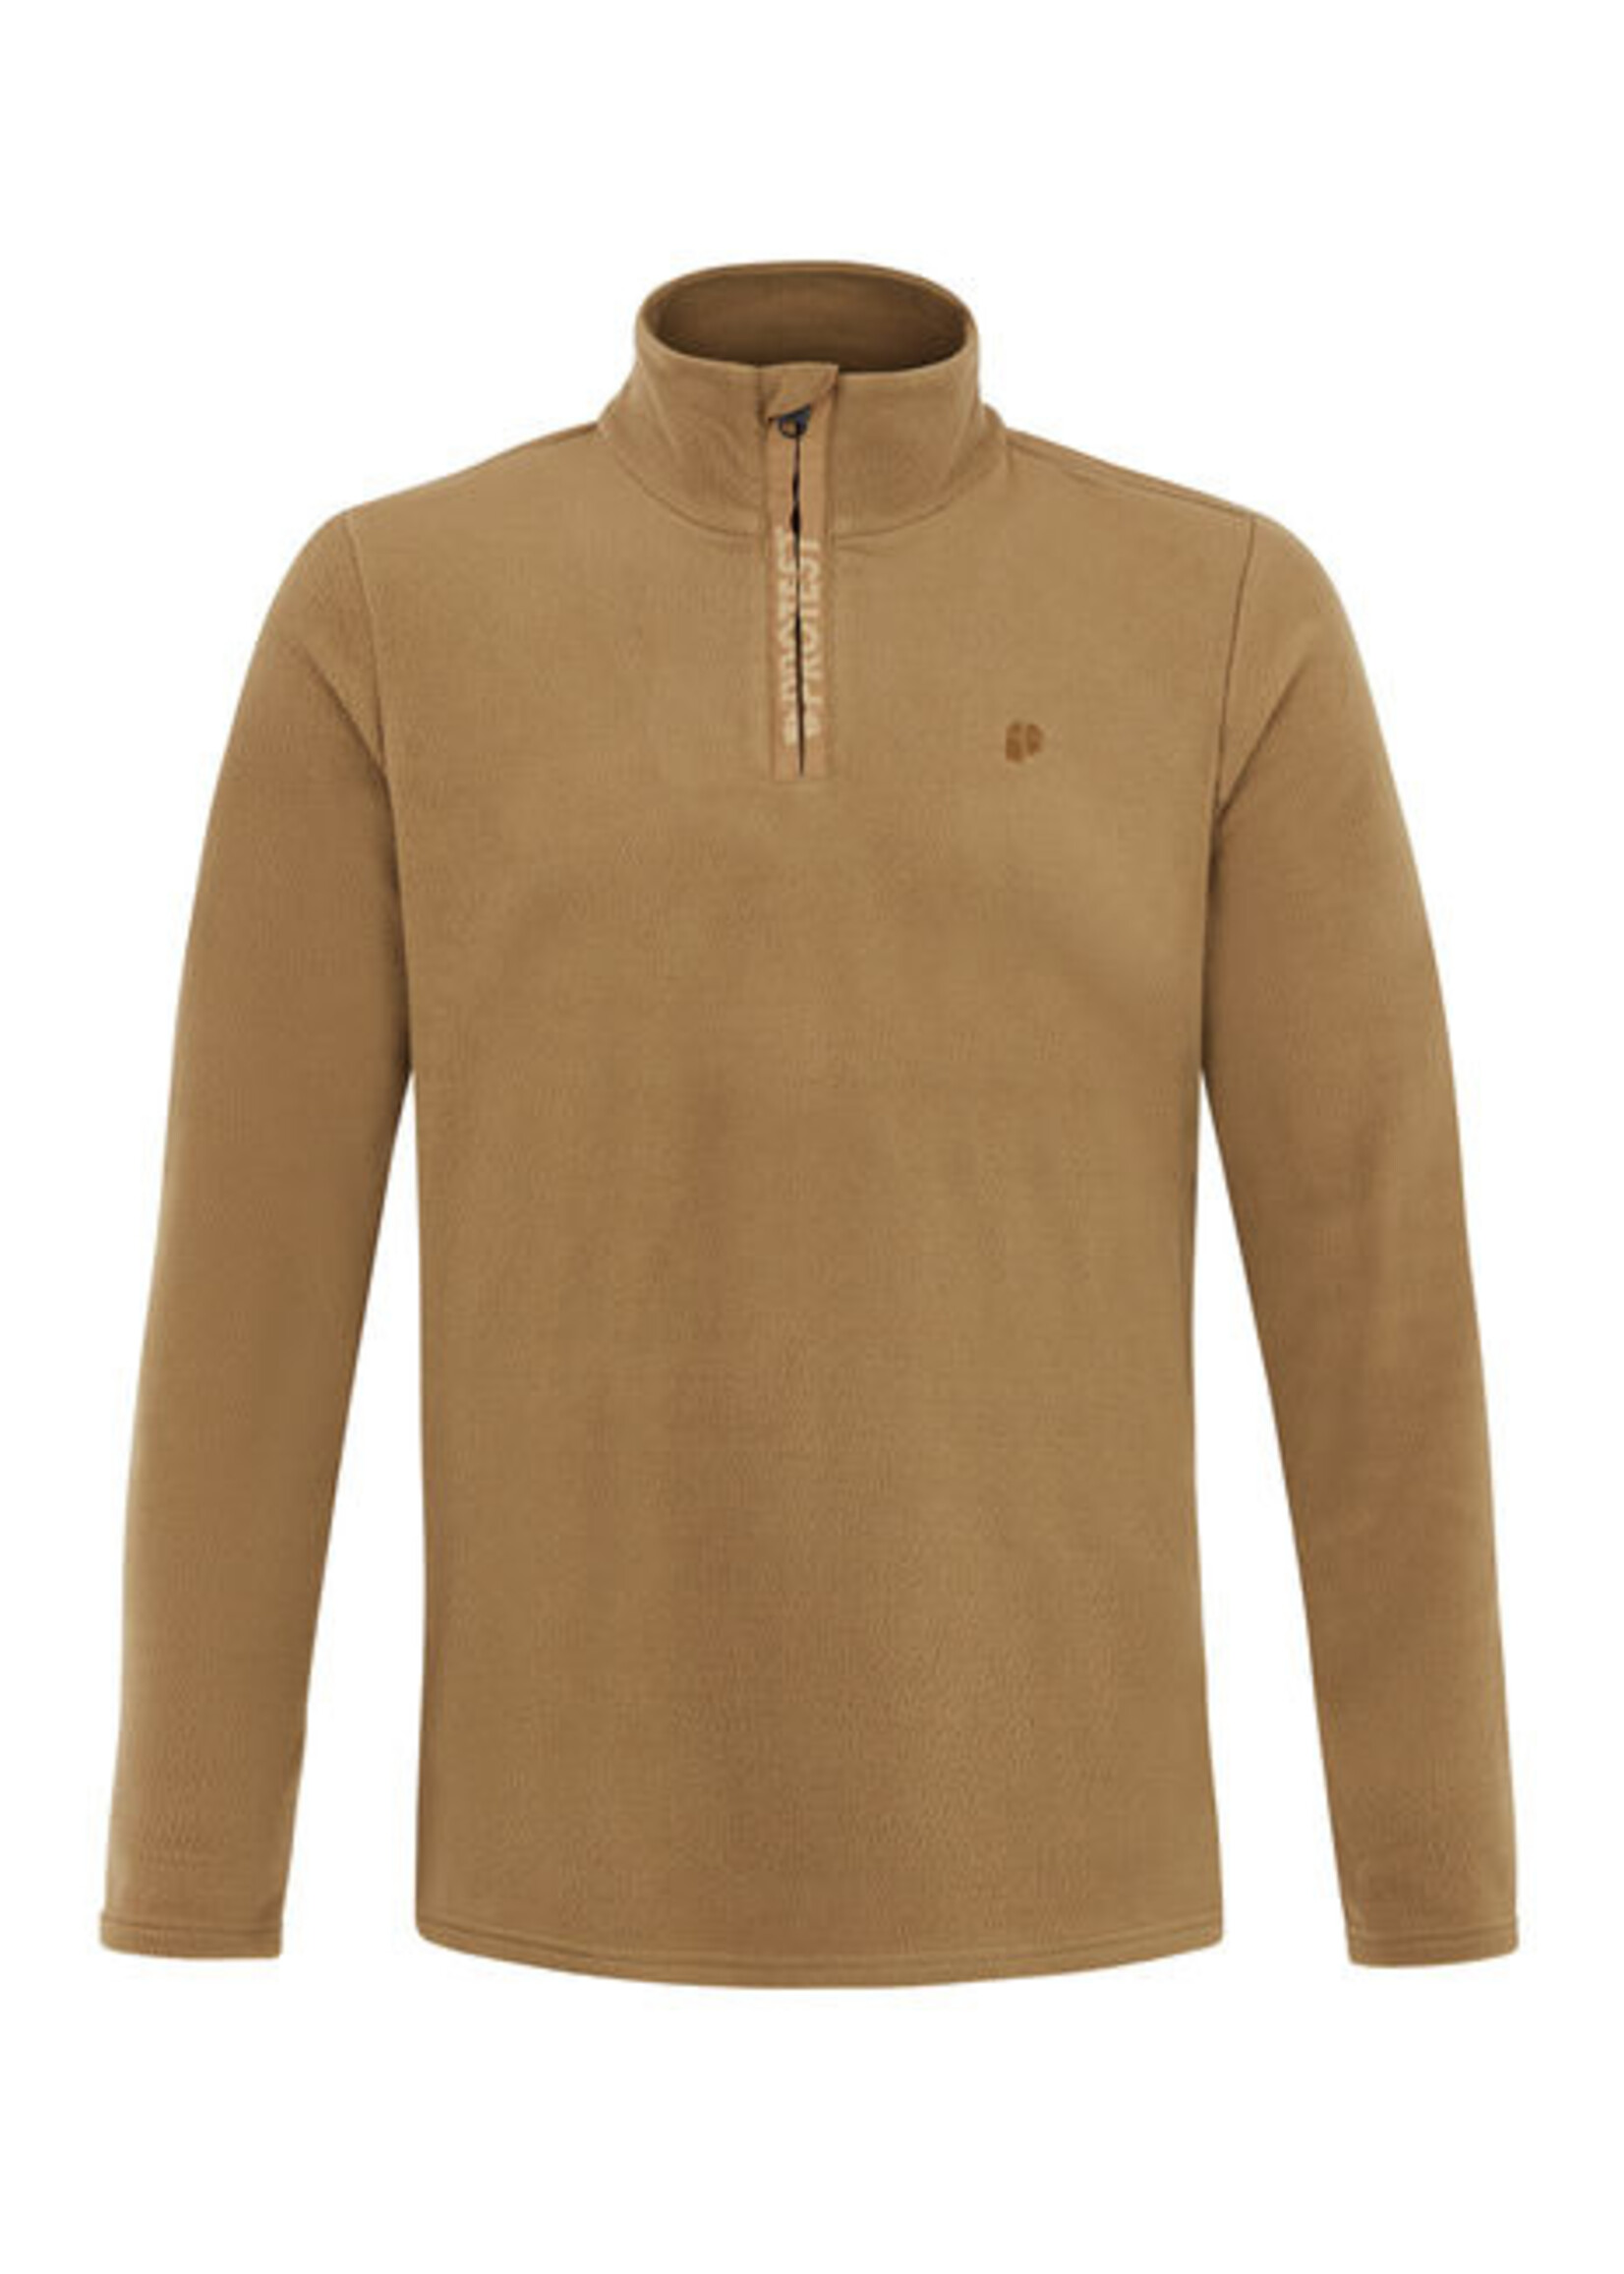 PROTEST  PERFECTO 1/4 zip top-Thyme